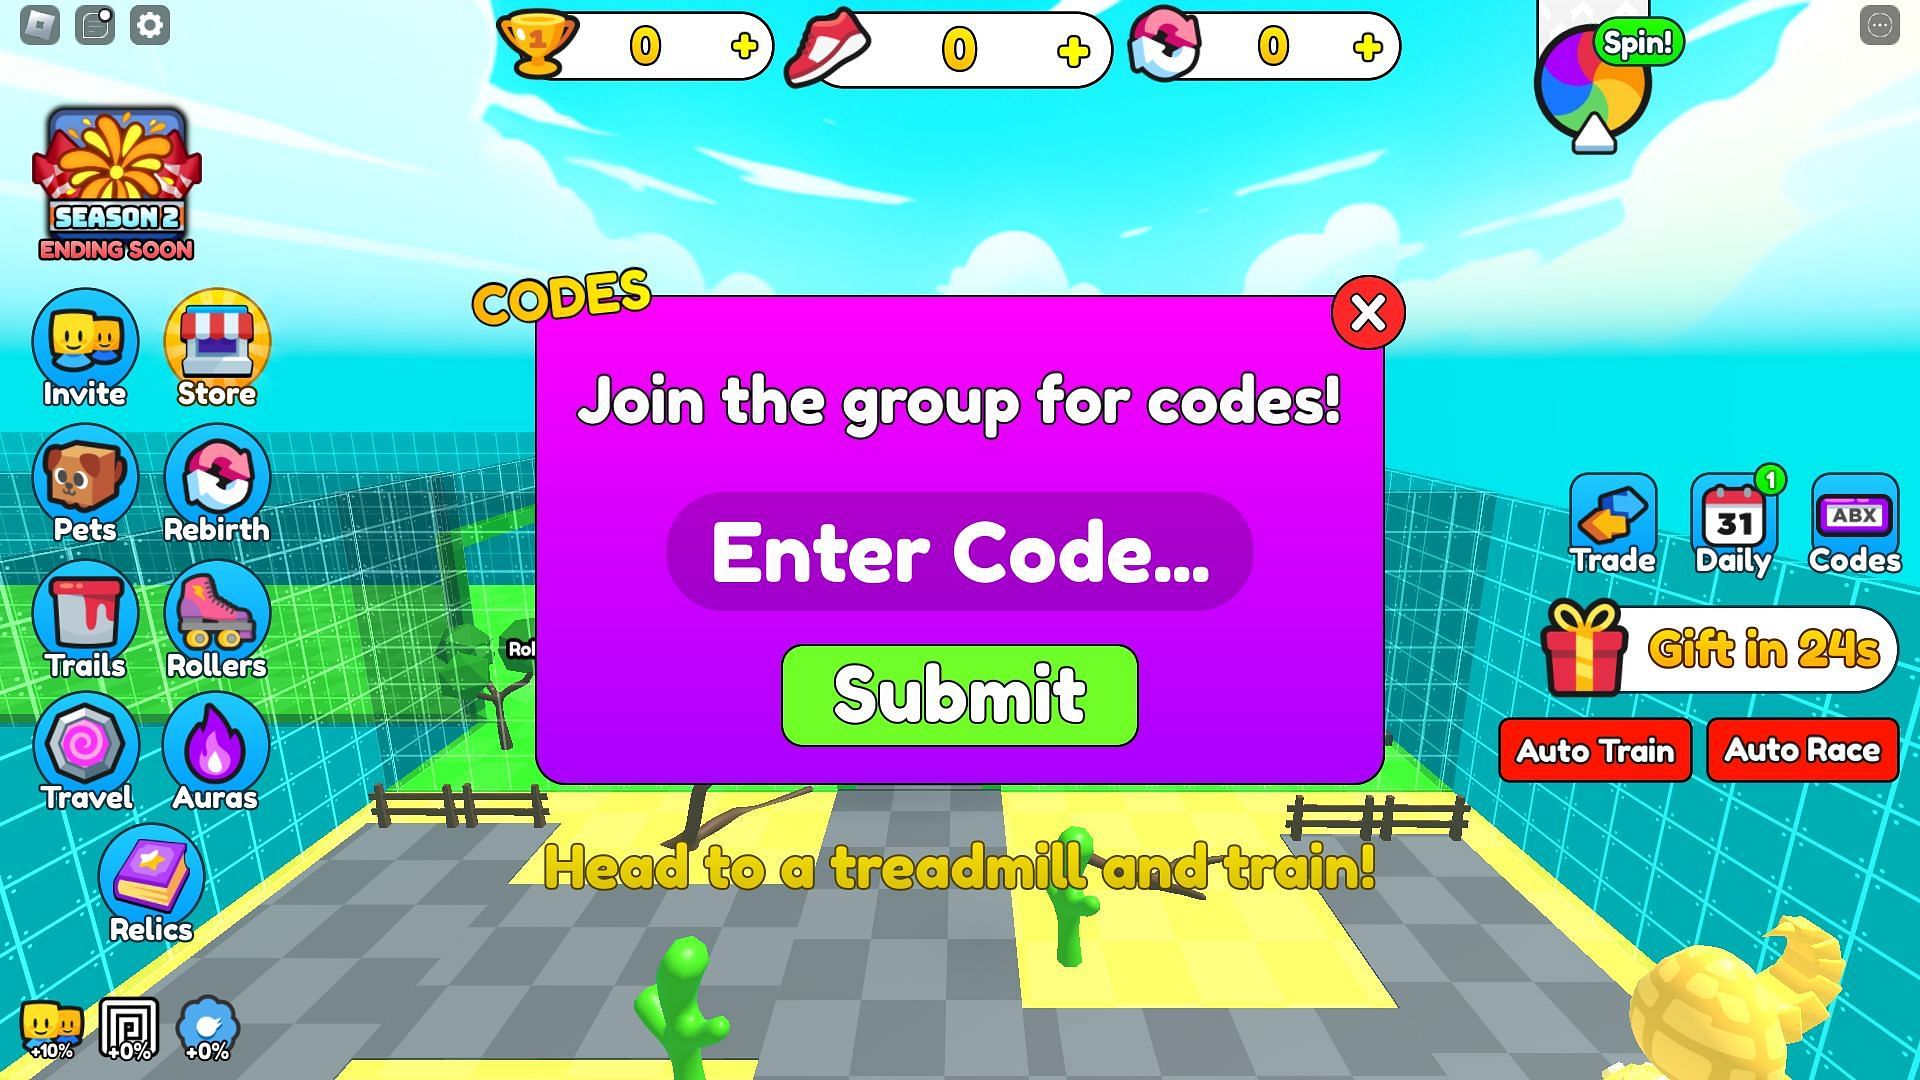 Active codes for Roller Race Simulator (Image via Roblox)